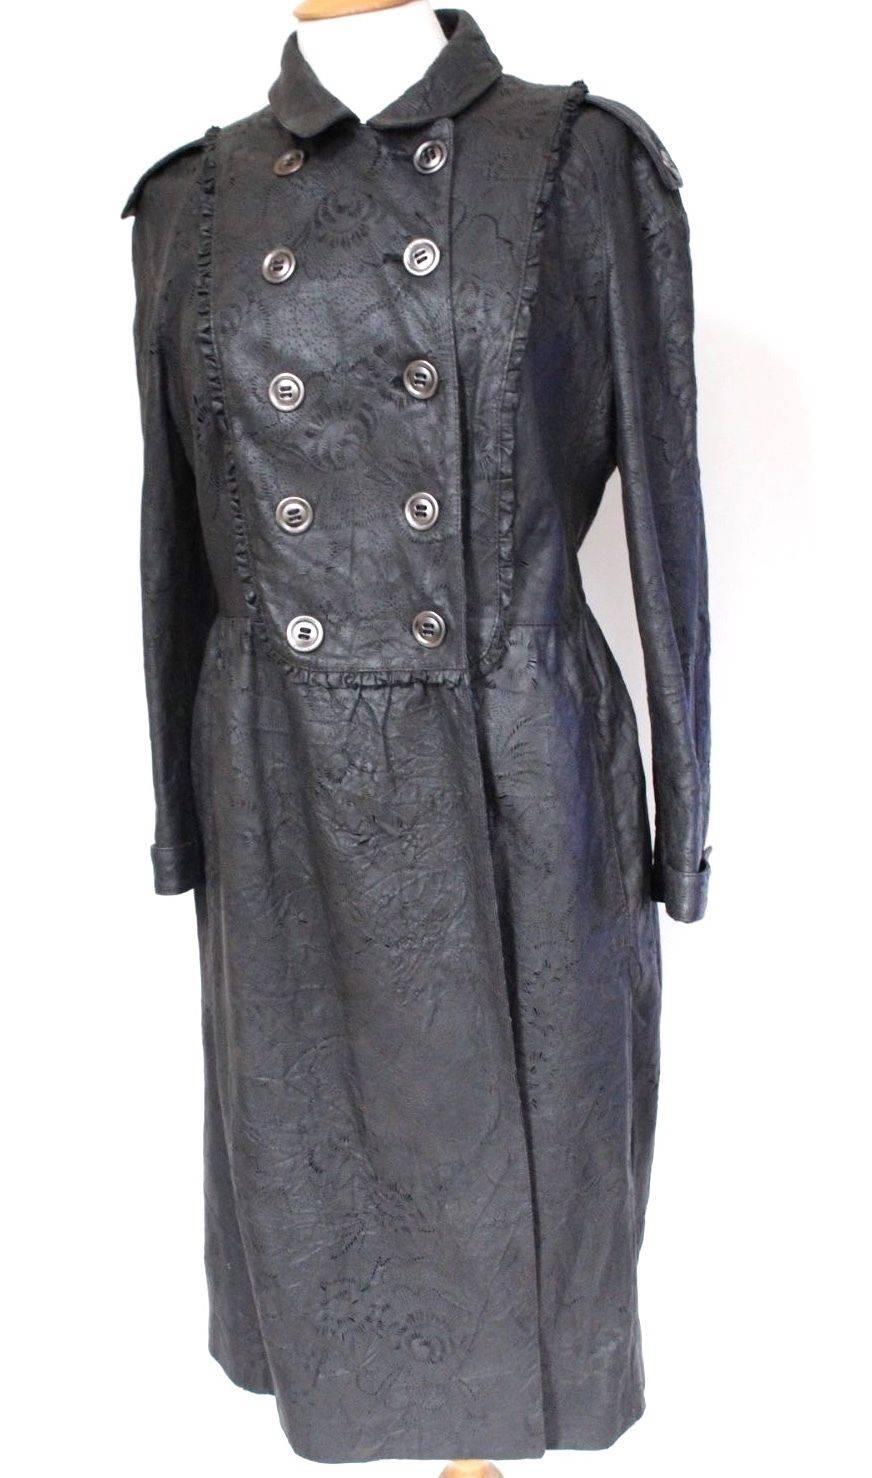 £3880 Burberry Prorsum Charcoal Lazer Cut lace Leather Trench Coat UK 12
Stunning leather coat from Burberry, featuring later cut detail with frill leather trim 
Double breasted, botton closure, fully lined
Length 37 inches, sleeve 23 inches,